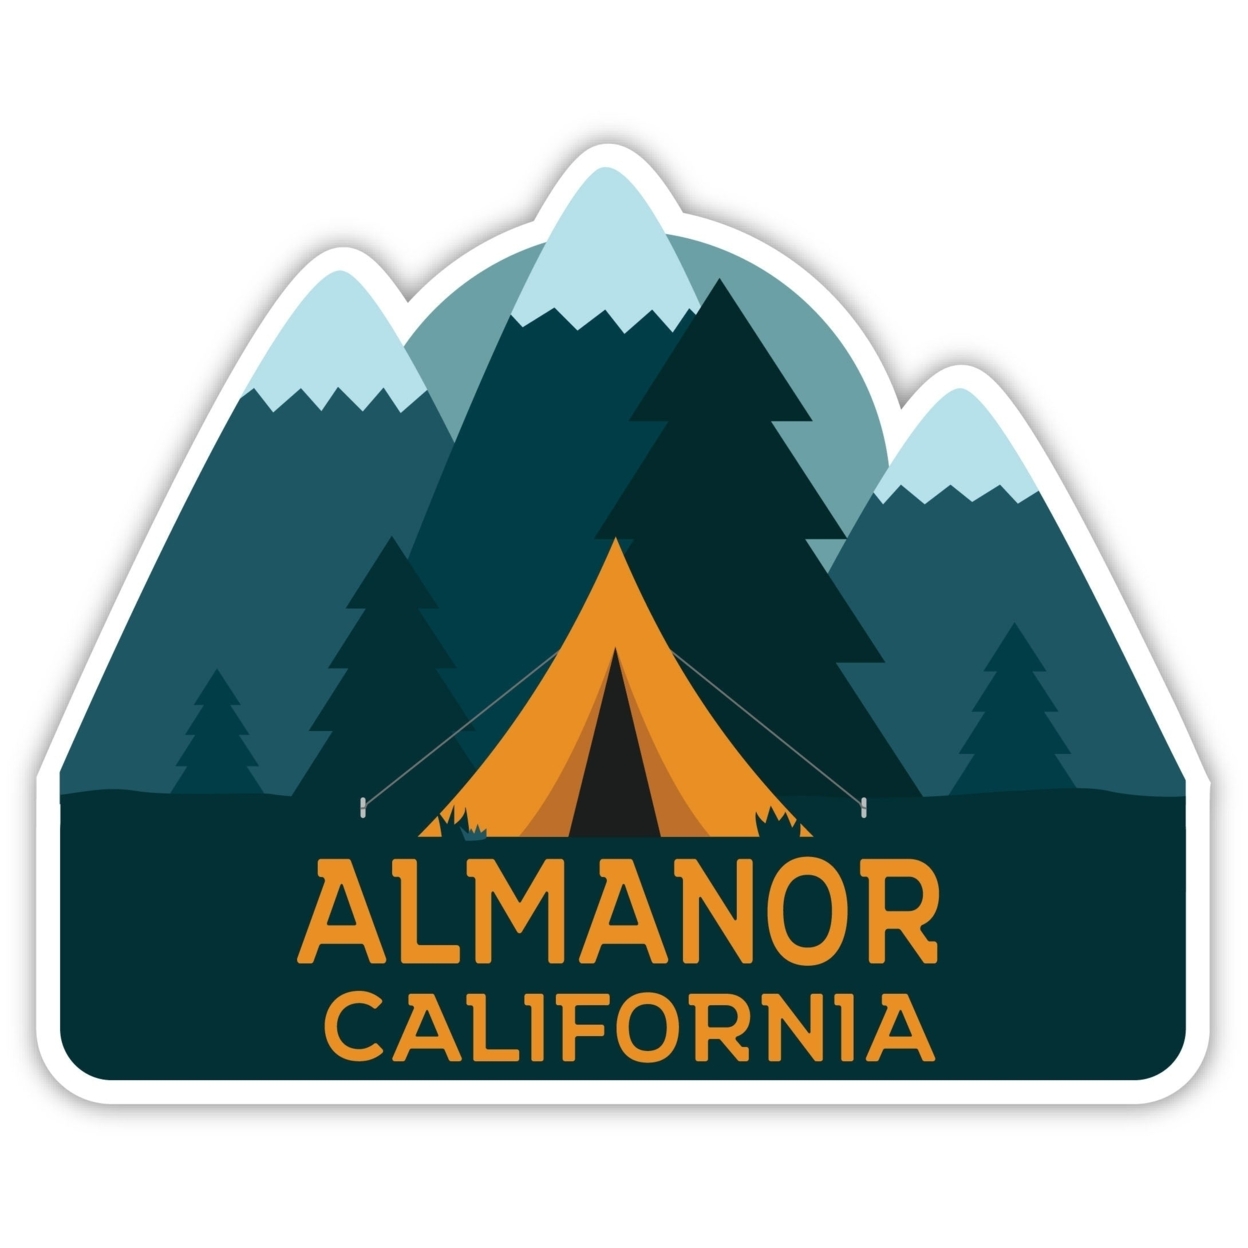 Almanor California Souvenir Decorative Stickers (Choose Theme And Size) - 4-Pack, 8-Inch, Bear